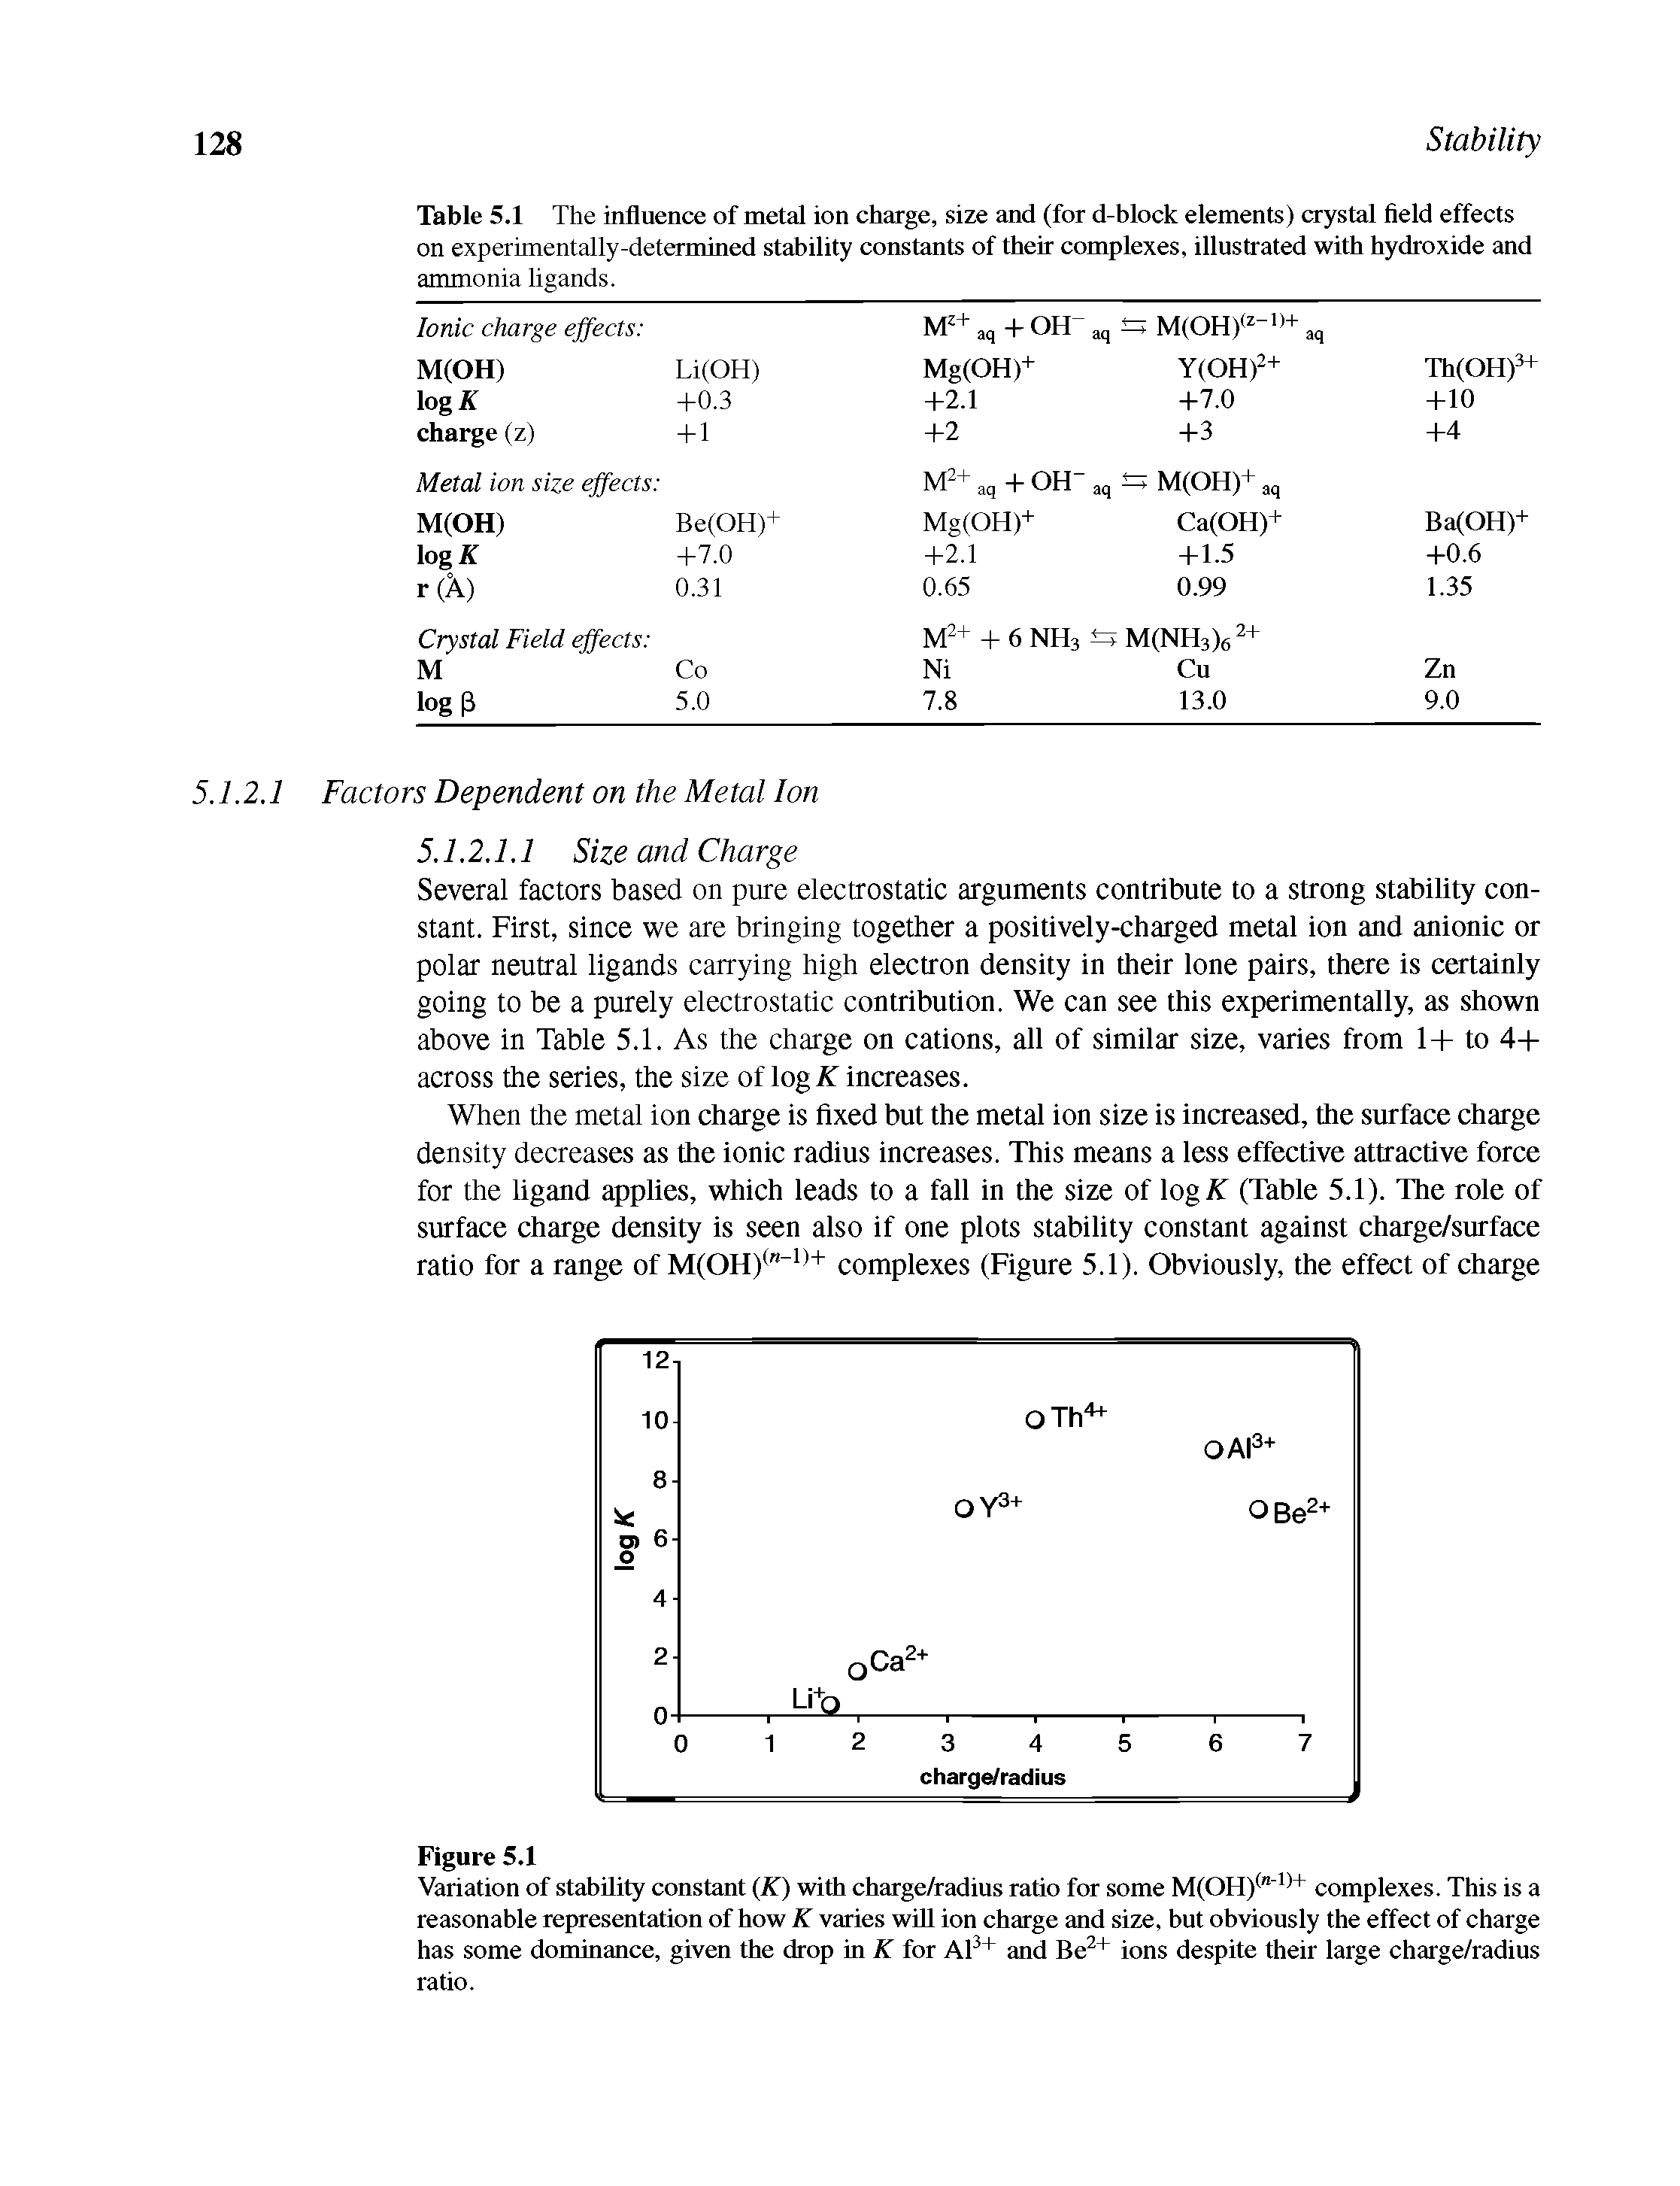 Table 5.1 The influence of metal ion charge, size and (for d-block elements) crystal field effects on experimentally-determined stability constants of their complexes, illustrated with hydroxide and ammonia ligands. ...